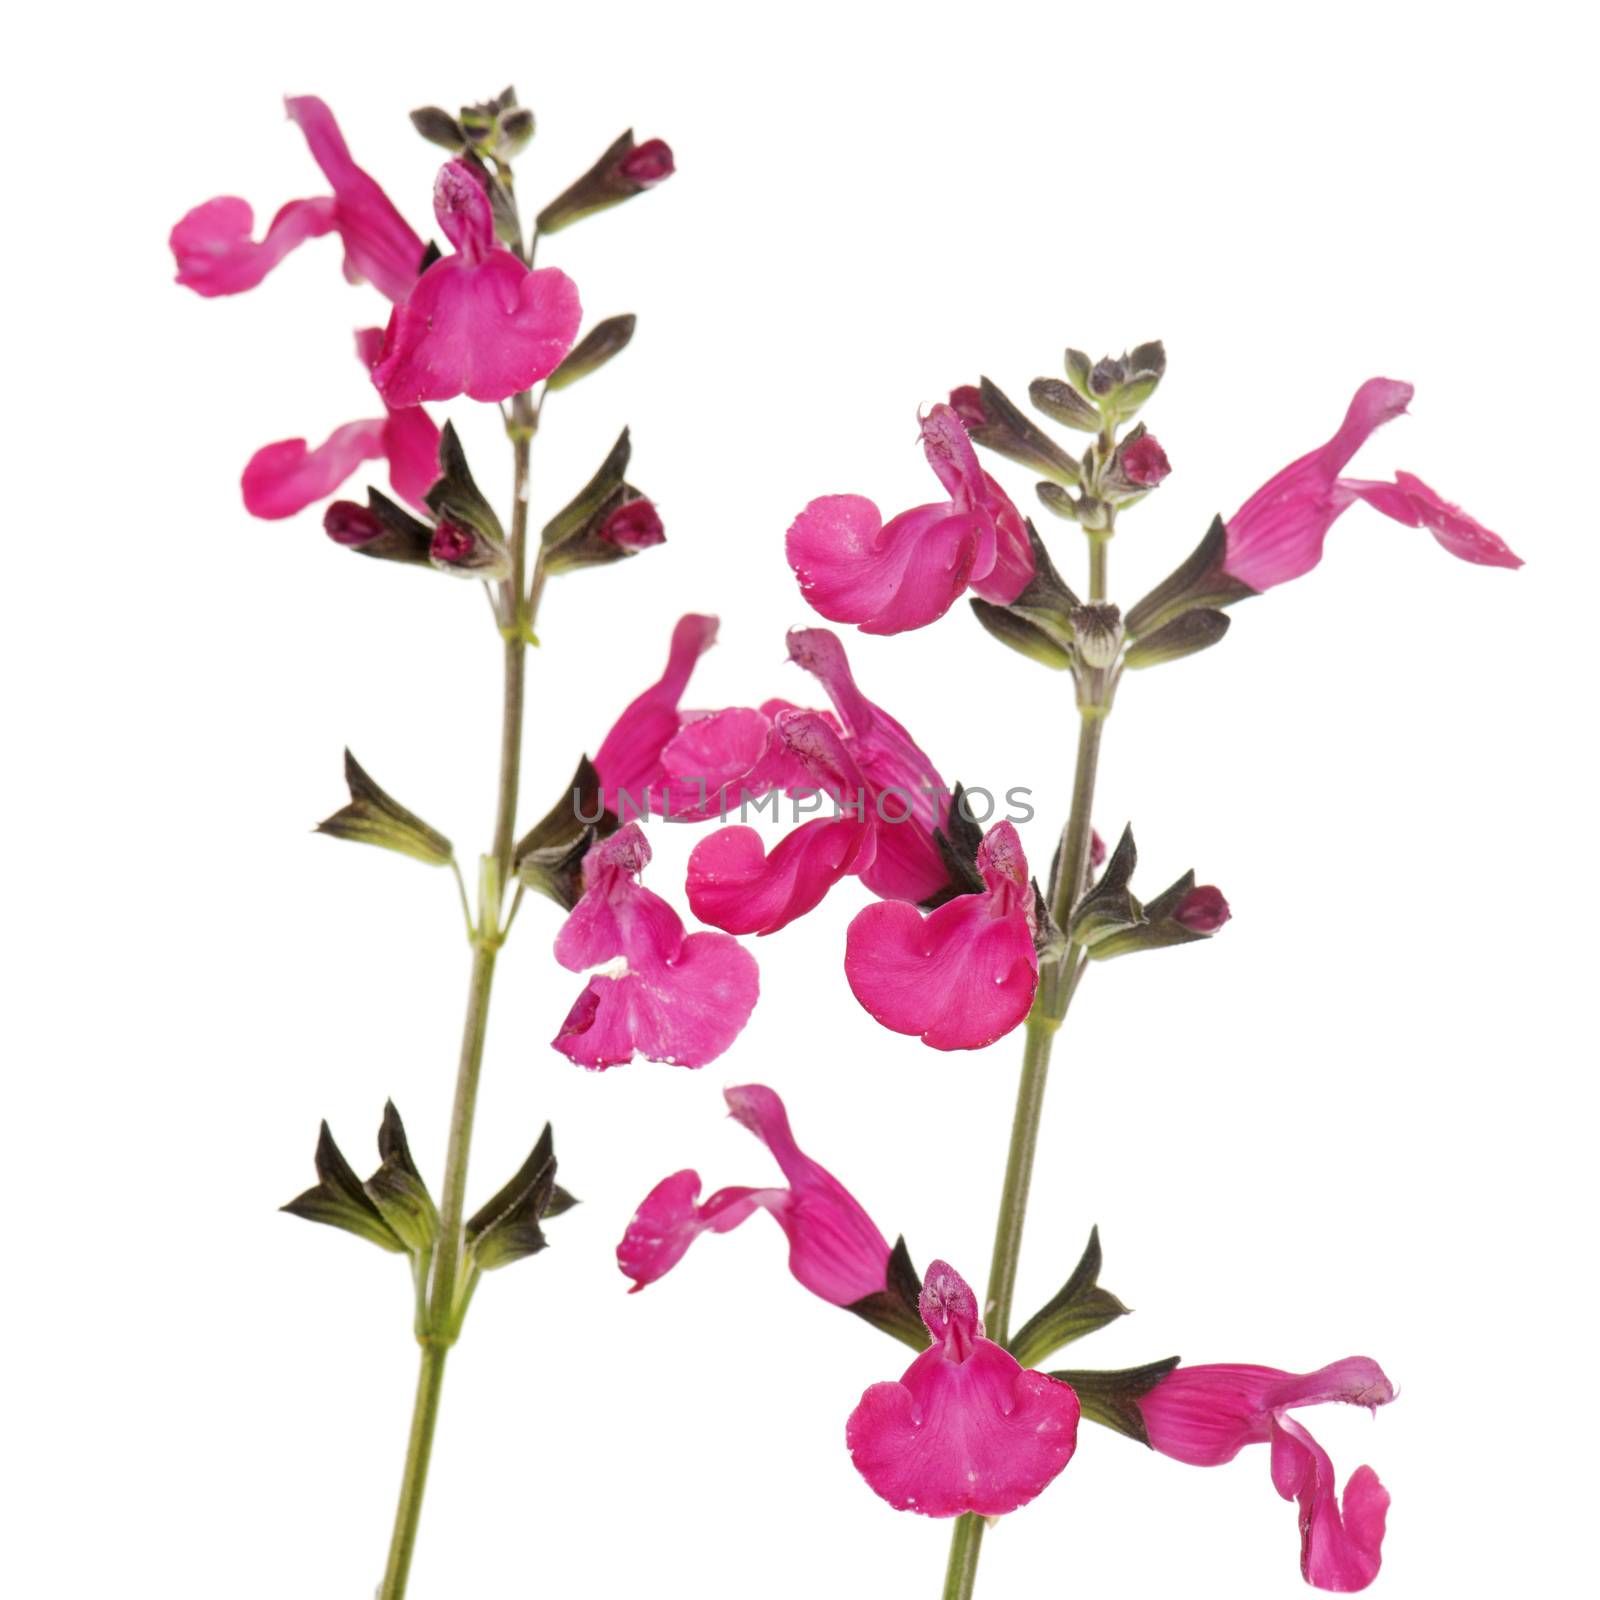 Salvia microphylla in front of white background